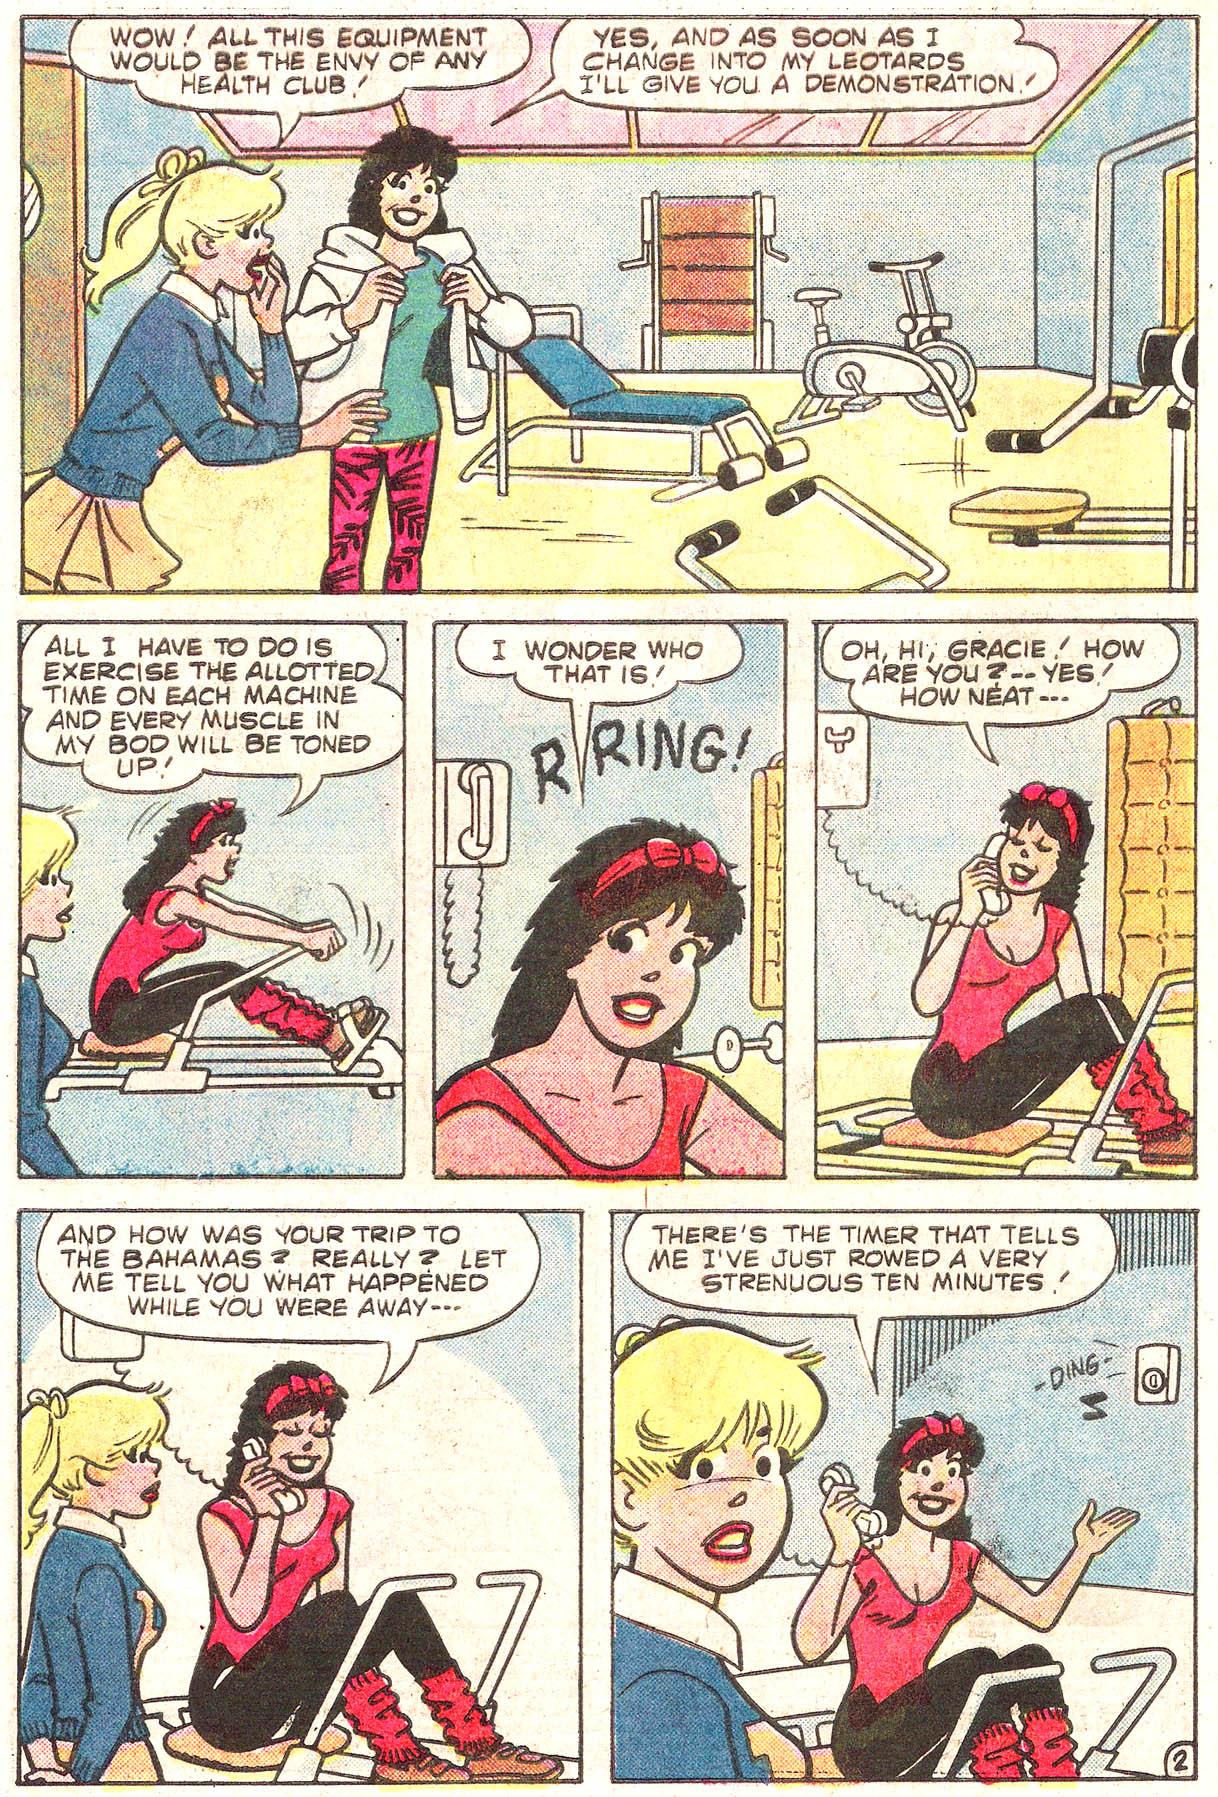 Read online Archie's Girls Betty and Veronica comic -  Issue #340 - 4